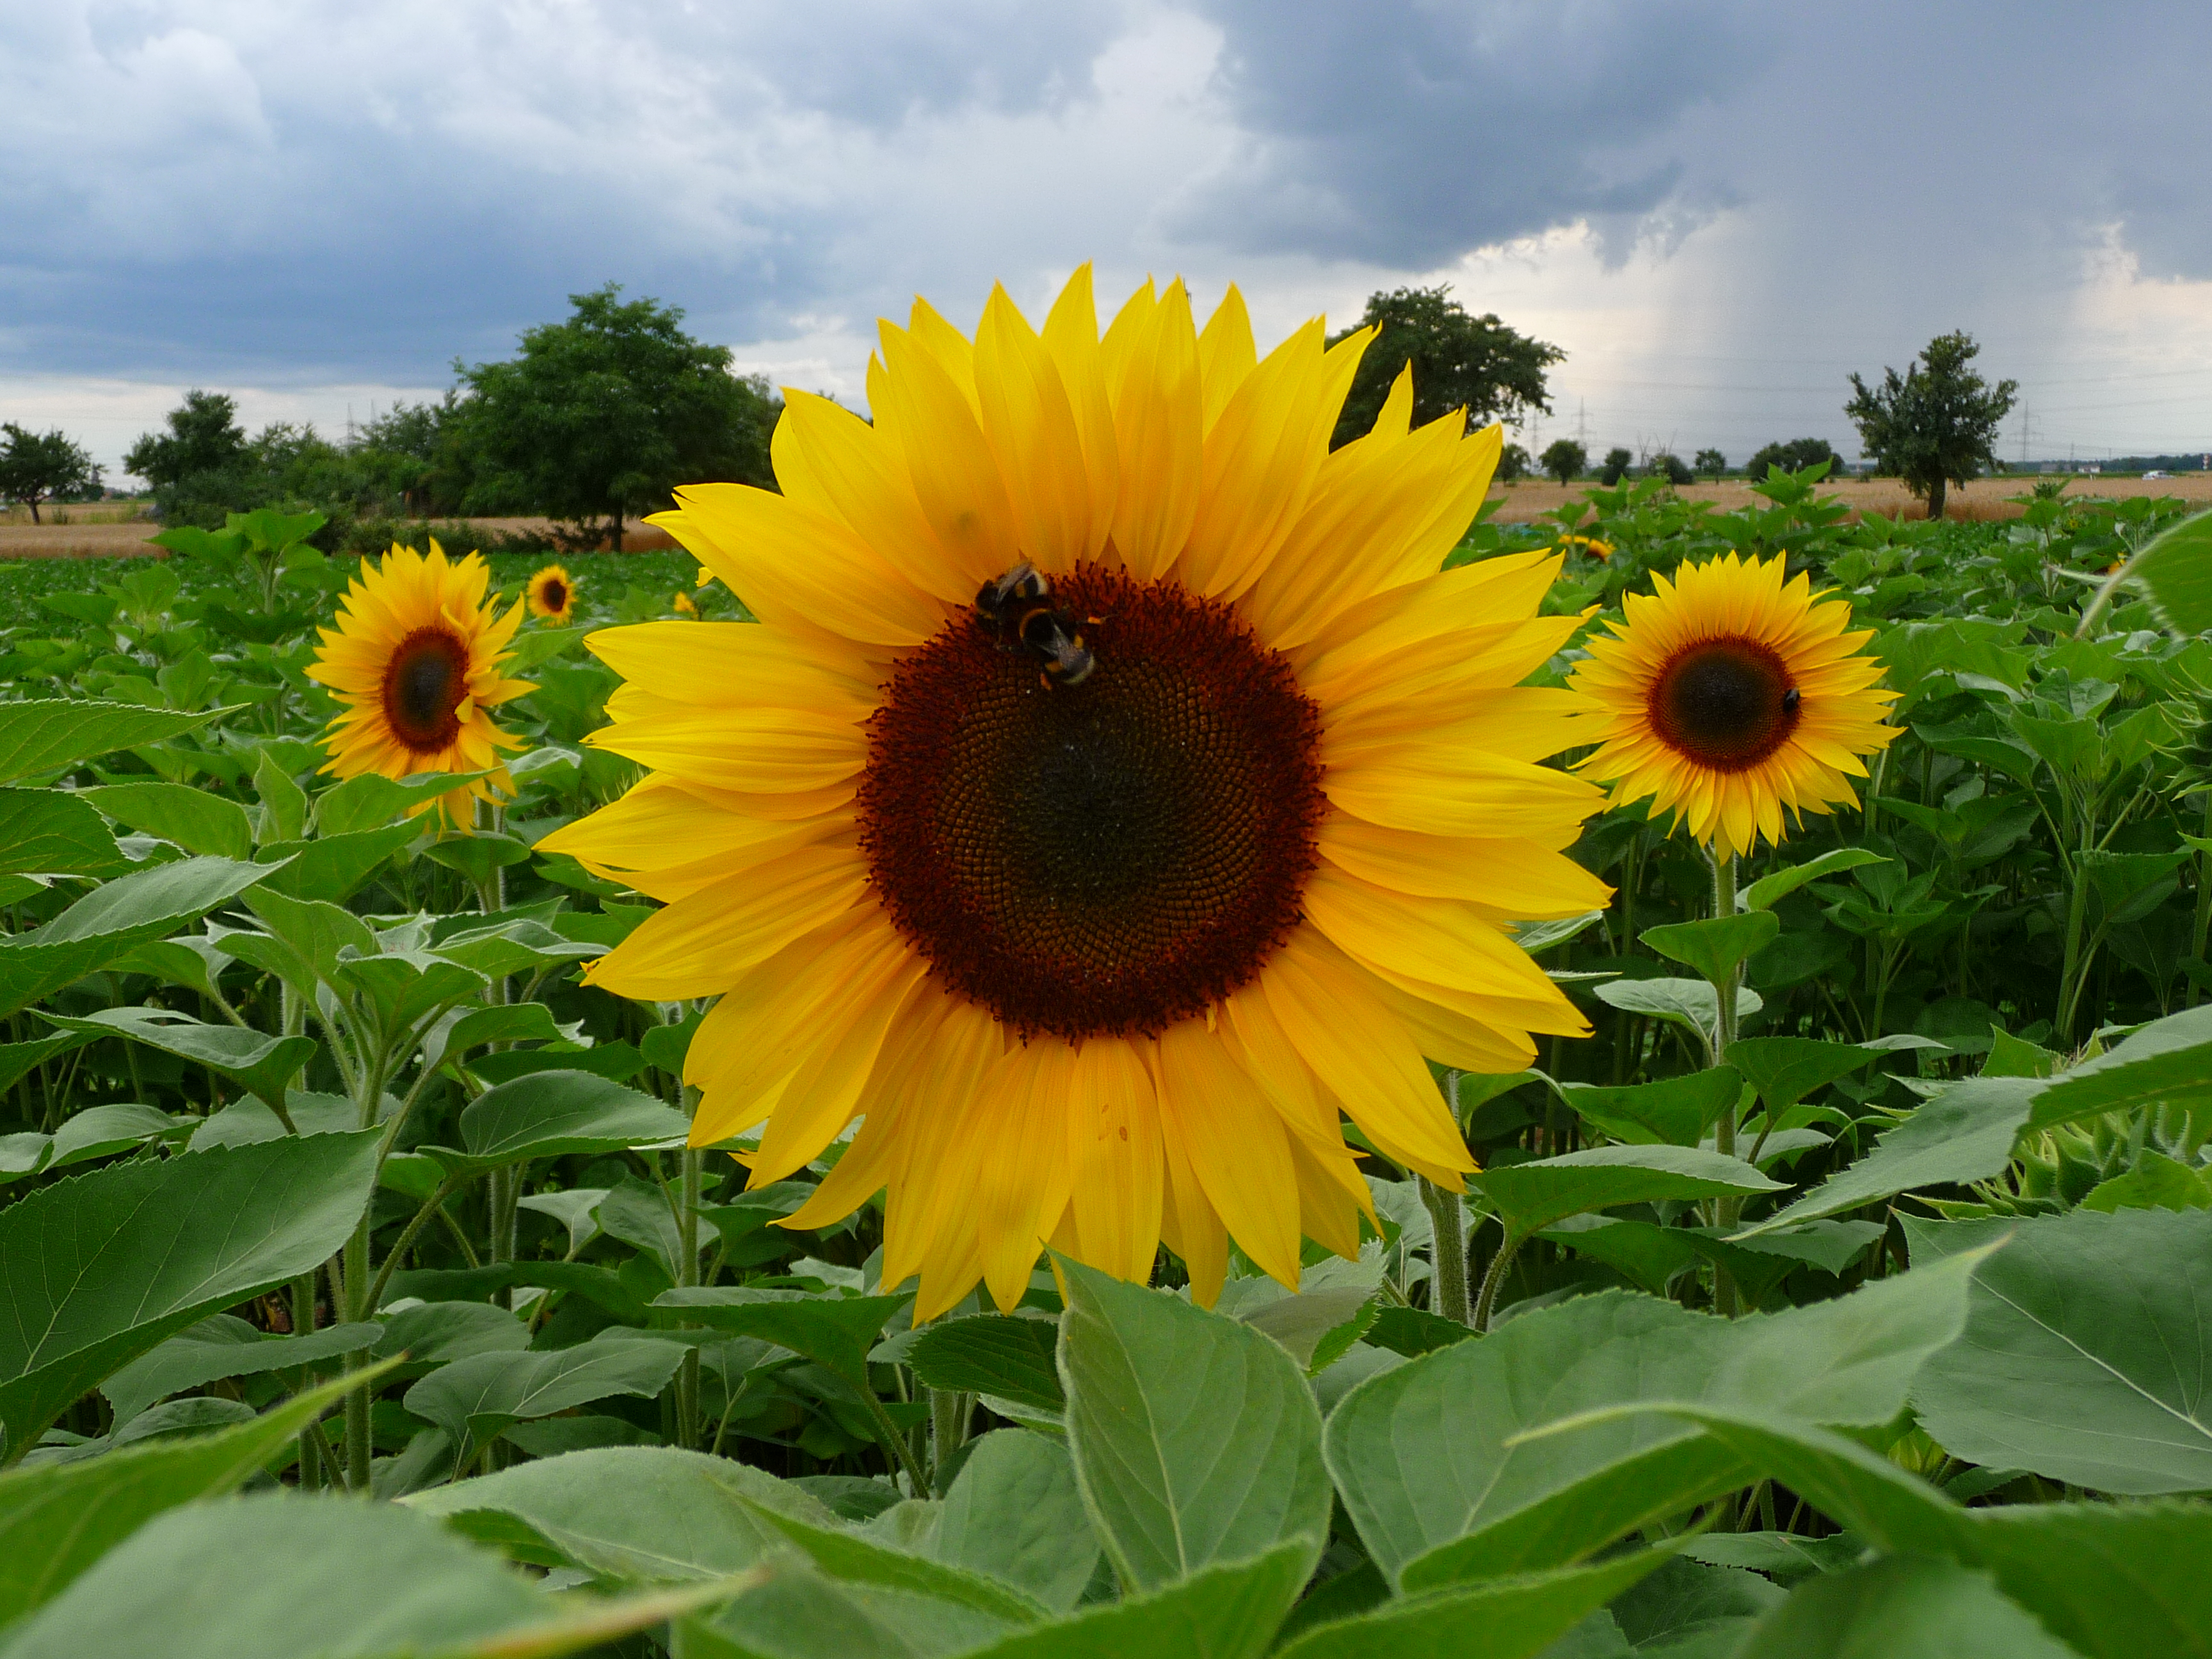 Cultivated Sunflowers and Their Wild Relatives – awkward botany